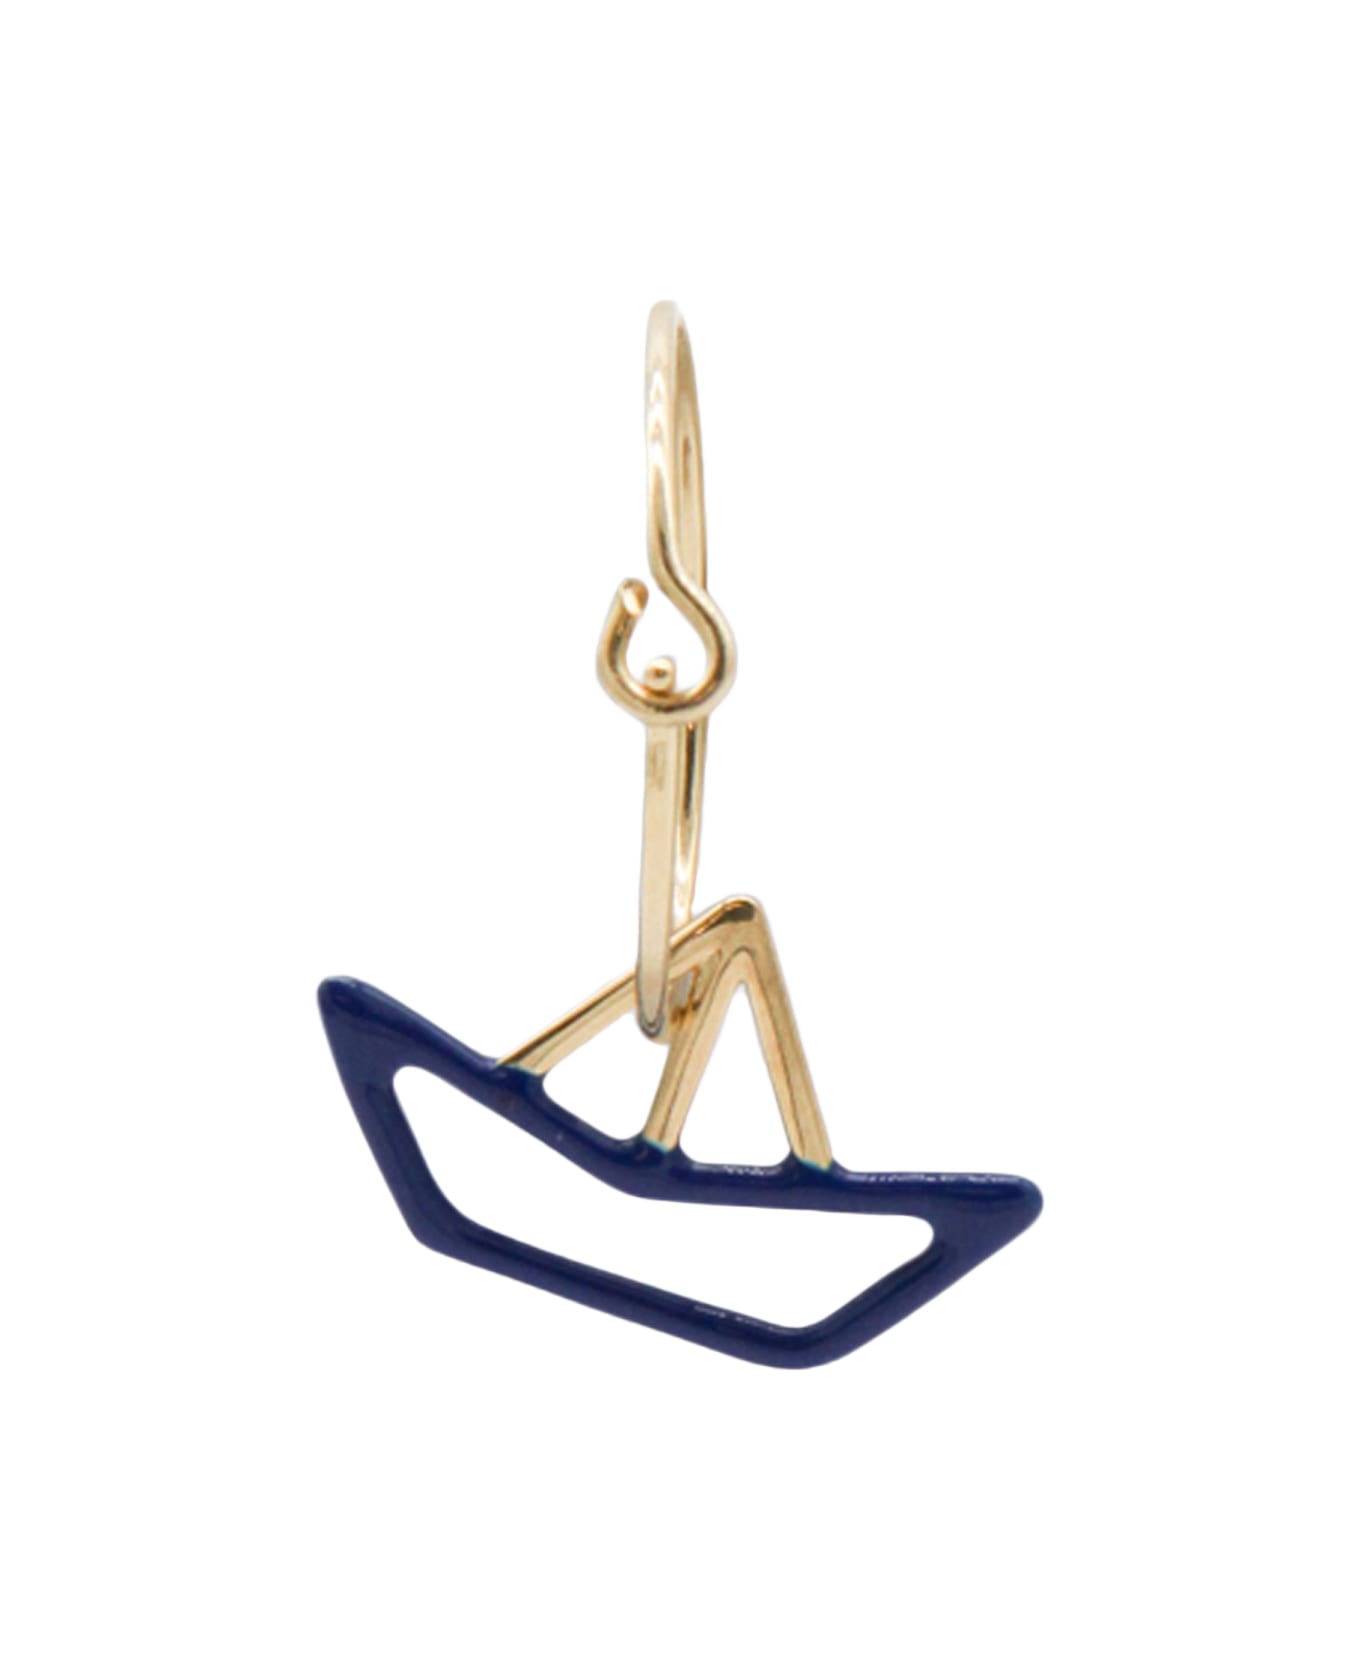 Aliita Blue And Giold Barquito Enamel Earring - BLUE/GOLD